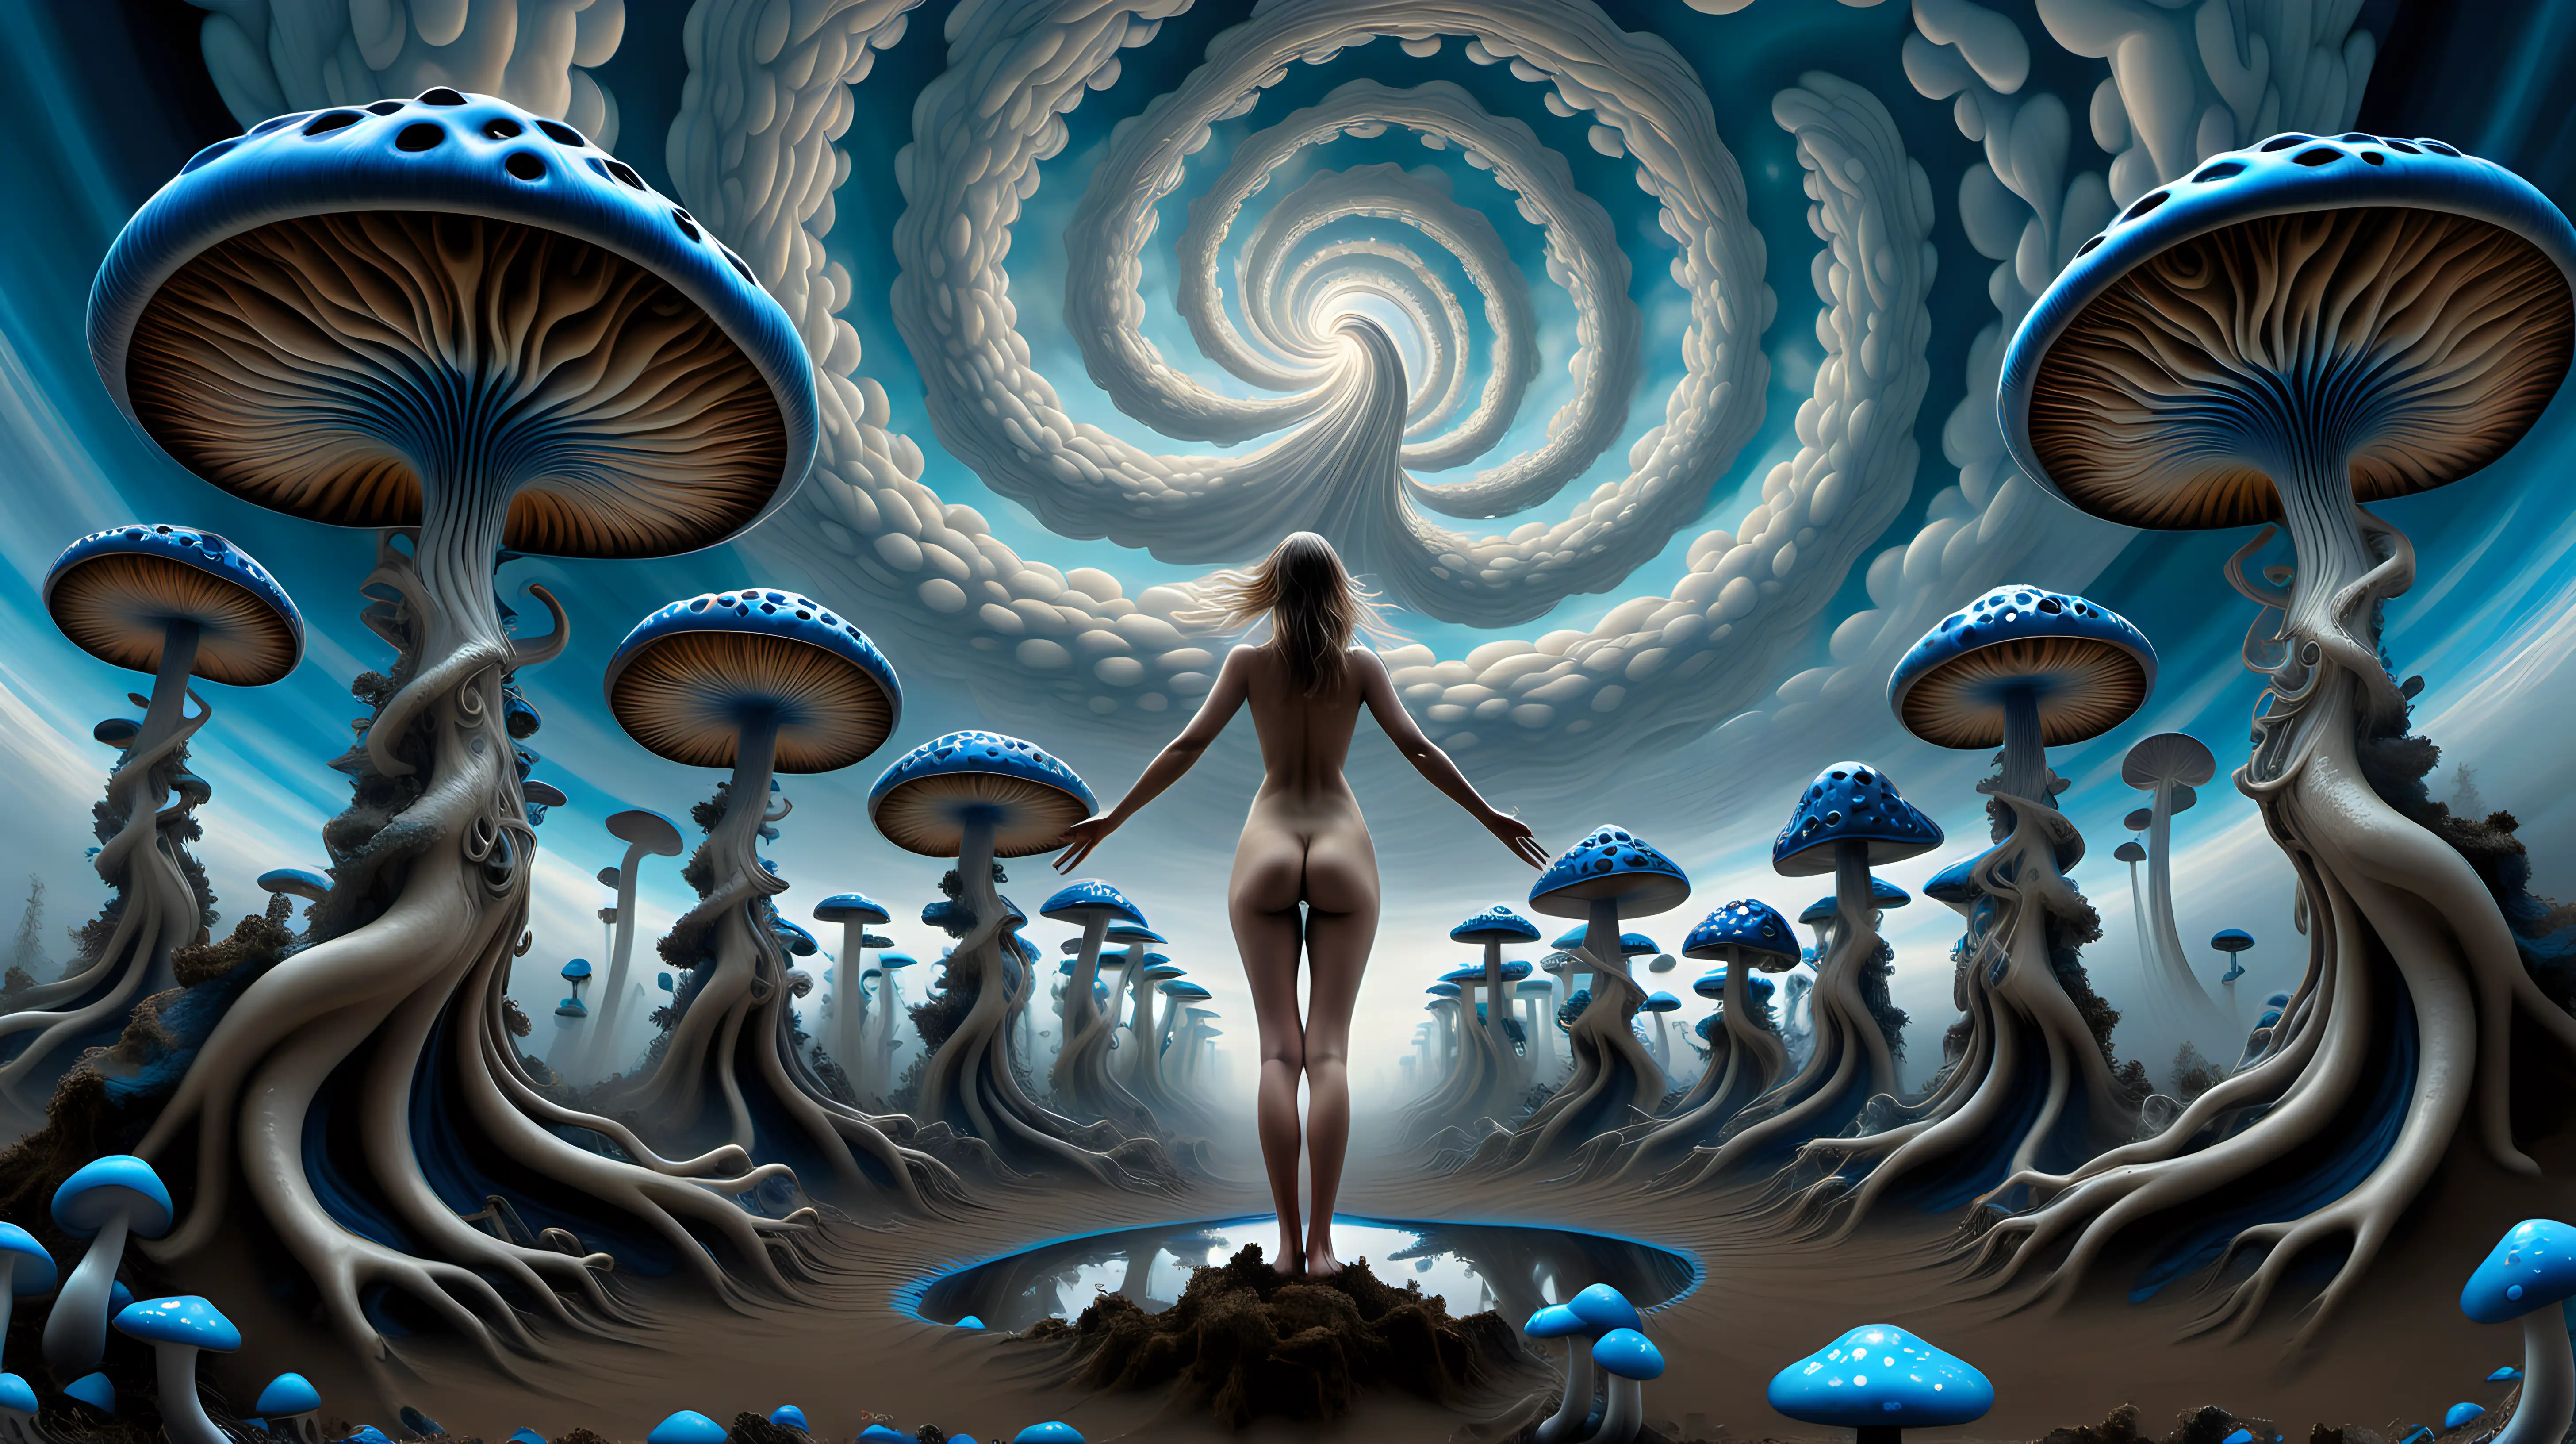 Psychedelic fractal sky with swirling fluid , blue mushrooms extending from the ground up to the sky on right and left, nude female figure standing in center facing the sky with arms extended, hyper realistic, moody and euphoric